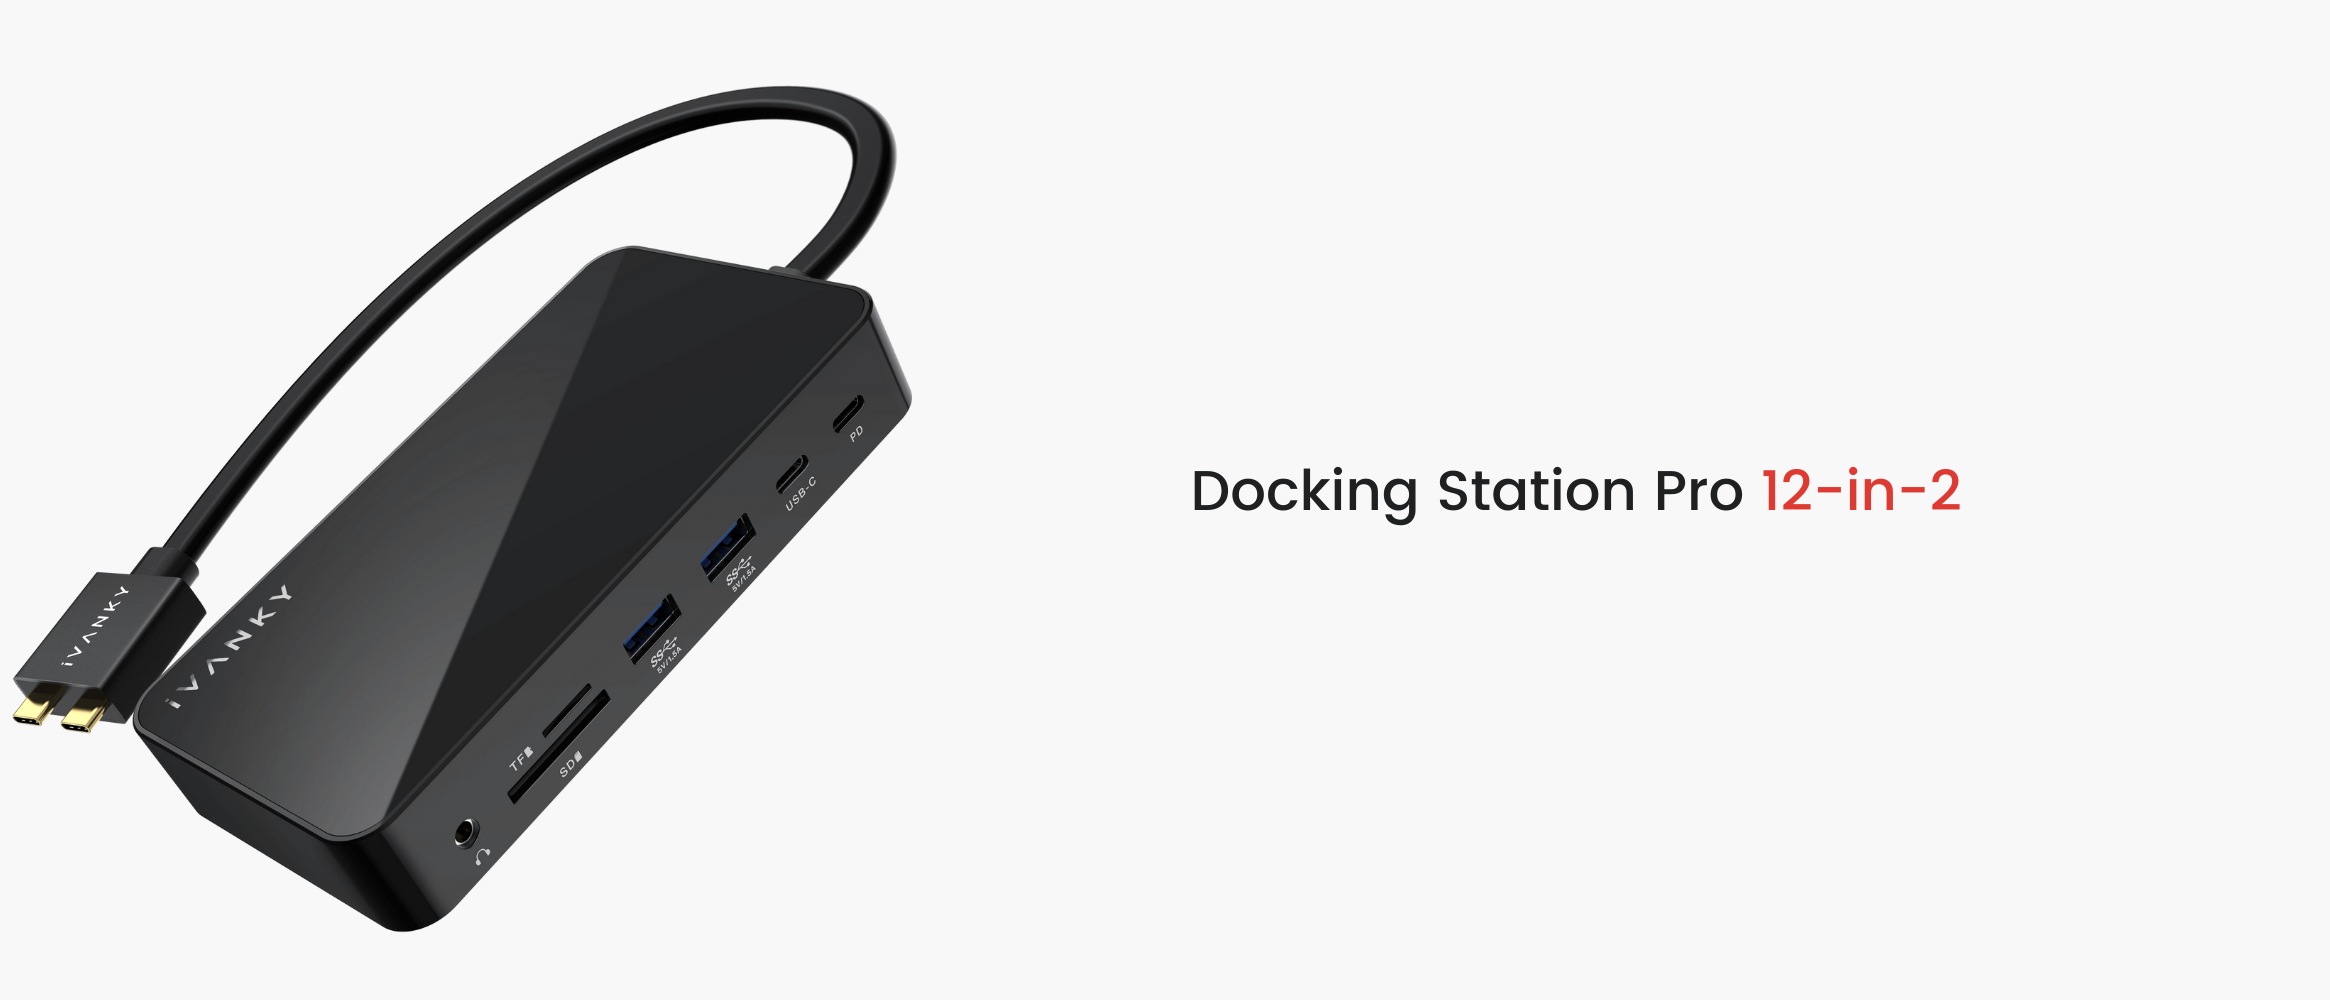 iVANKY docking station Pro 12-in-2